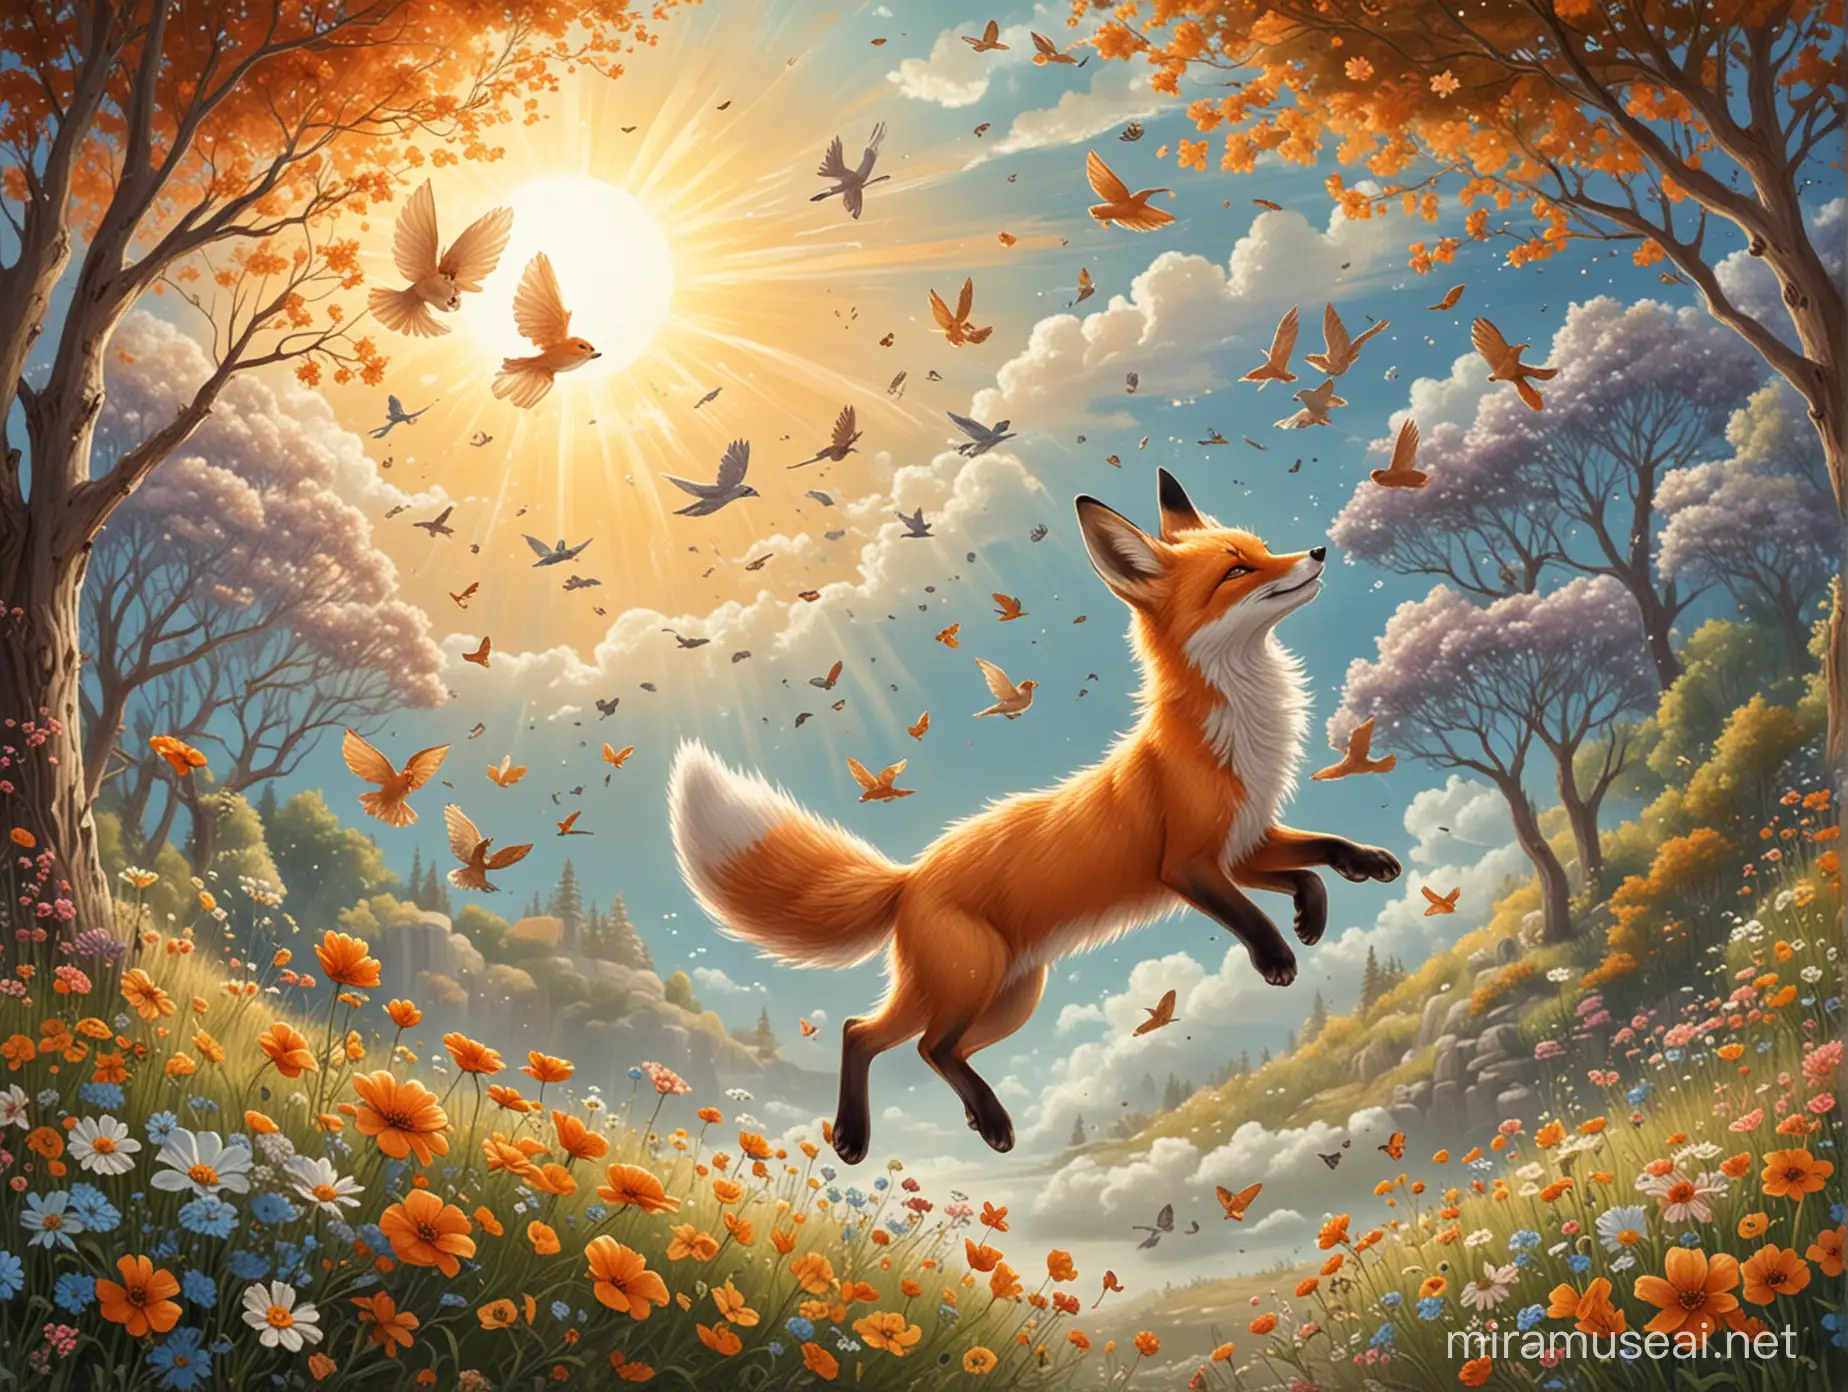 Whimsical Fox and Rabbit Frolicking in Sunny Meadow